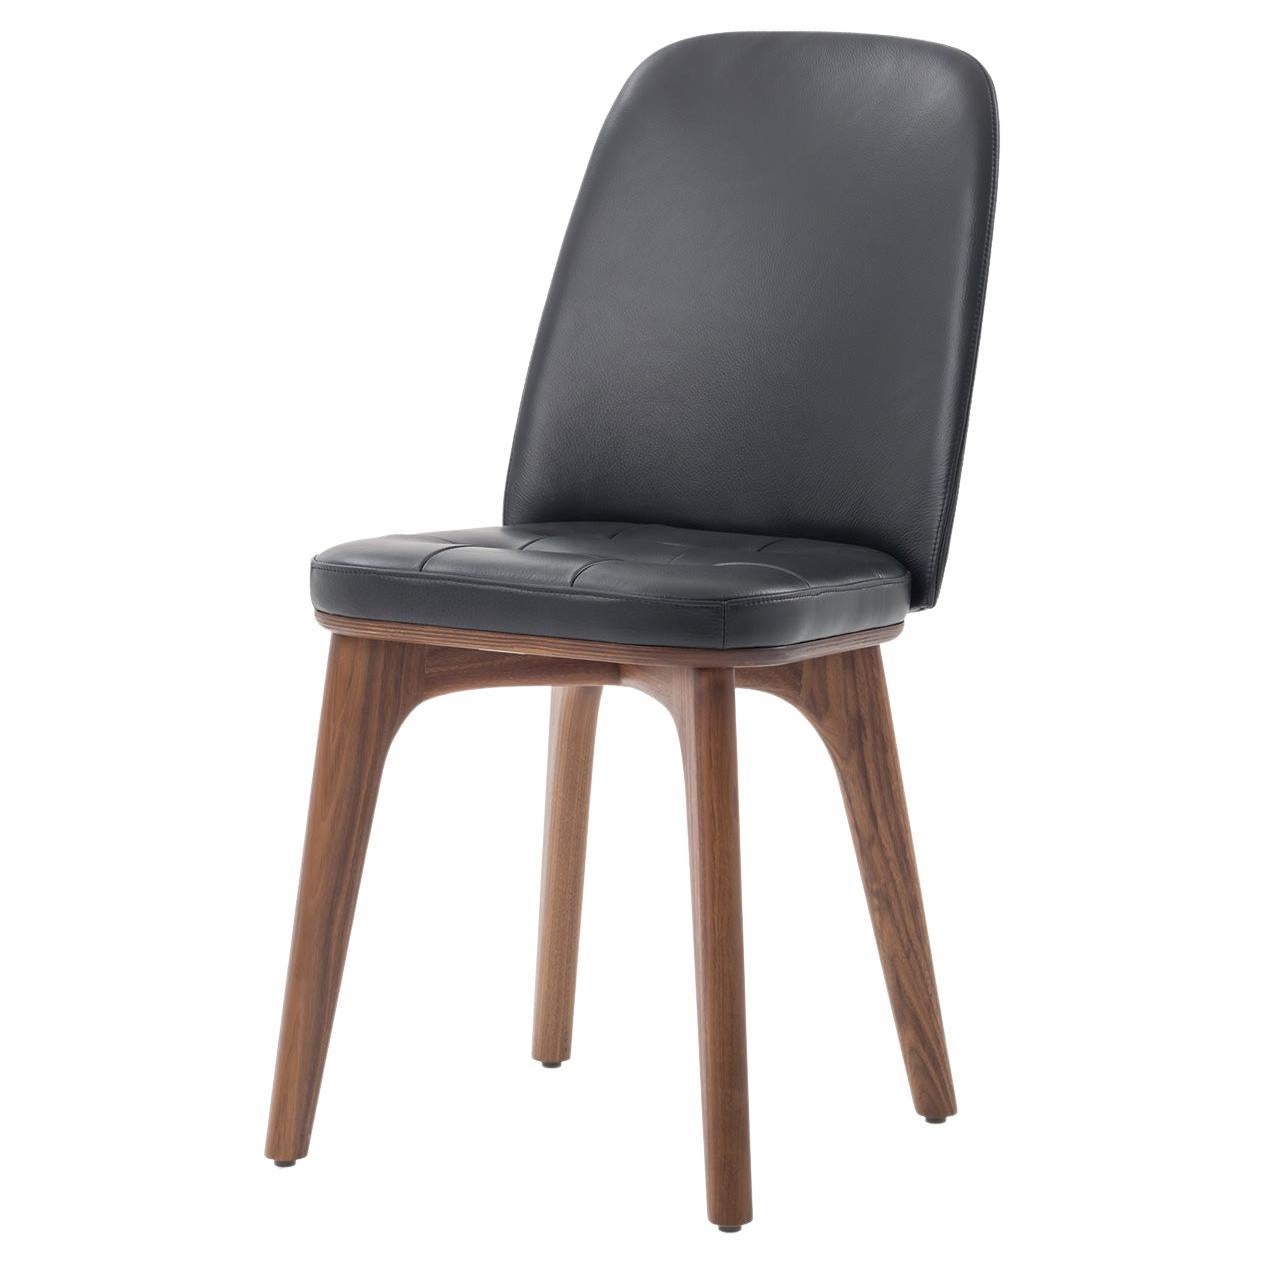 Walnut Stained Ash and Caress Black Leather Highback Chair, Utility For Sale